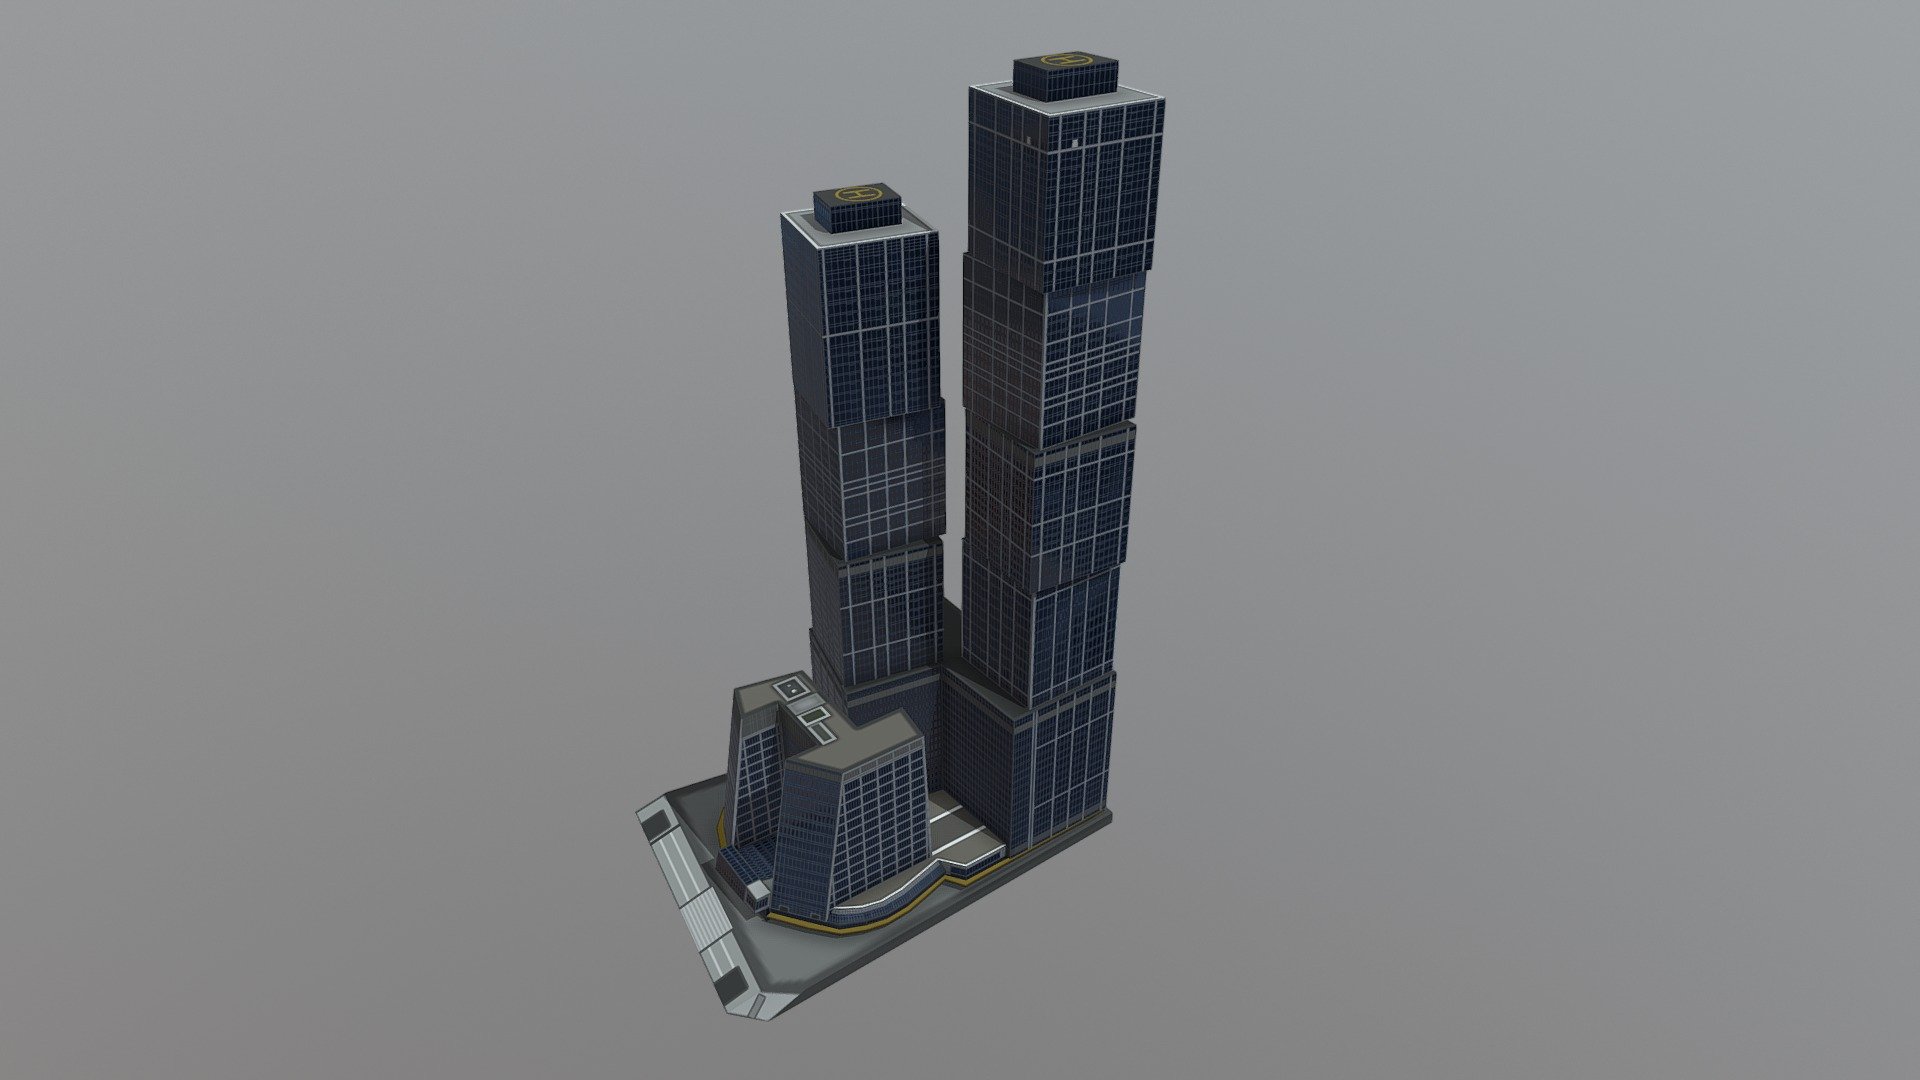 You can buy this 3D Model here - -link removed-  Low-Poly 3D Model of the City of Capitals which is a multifunctional complex, including twin tower skyscrapers, located on plot 9 in the Moscow International Business Center in Moscow. The City of Capitals, symbolising Moscow and St. Petersburg, was completed in 2009 3d model